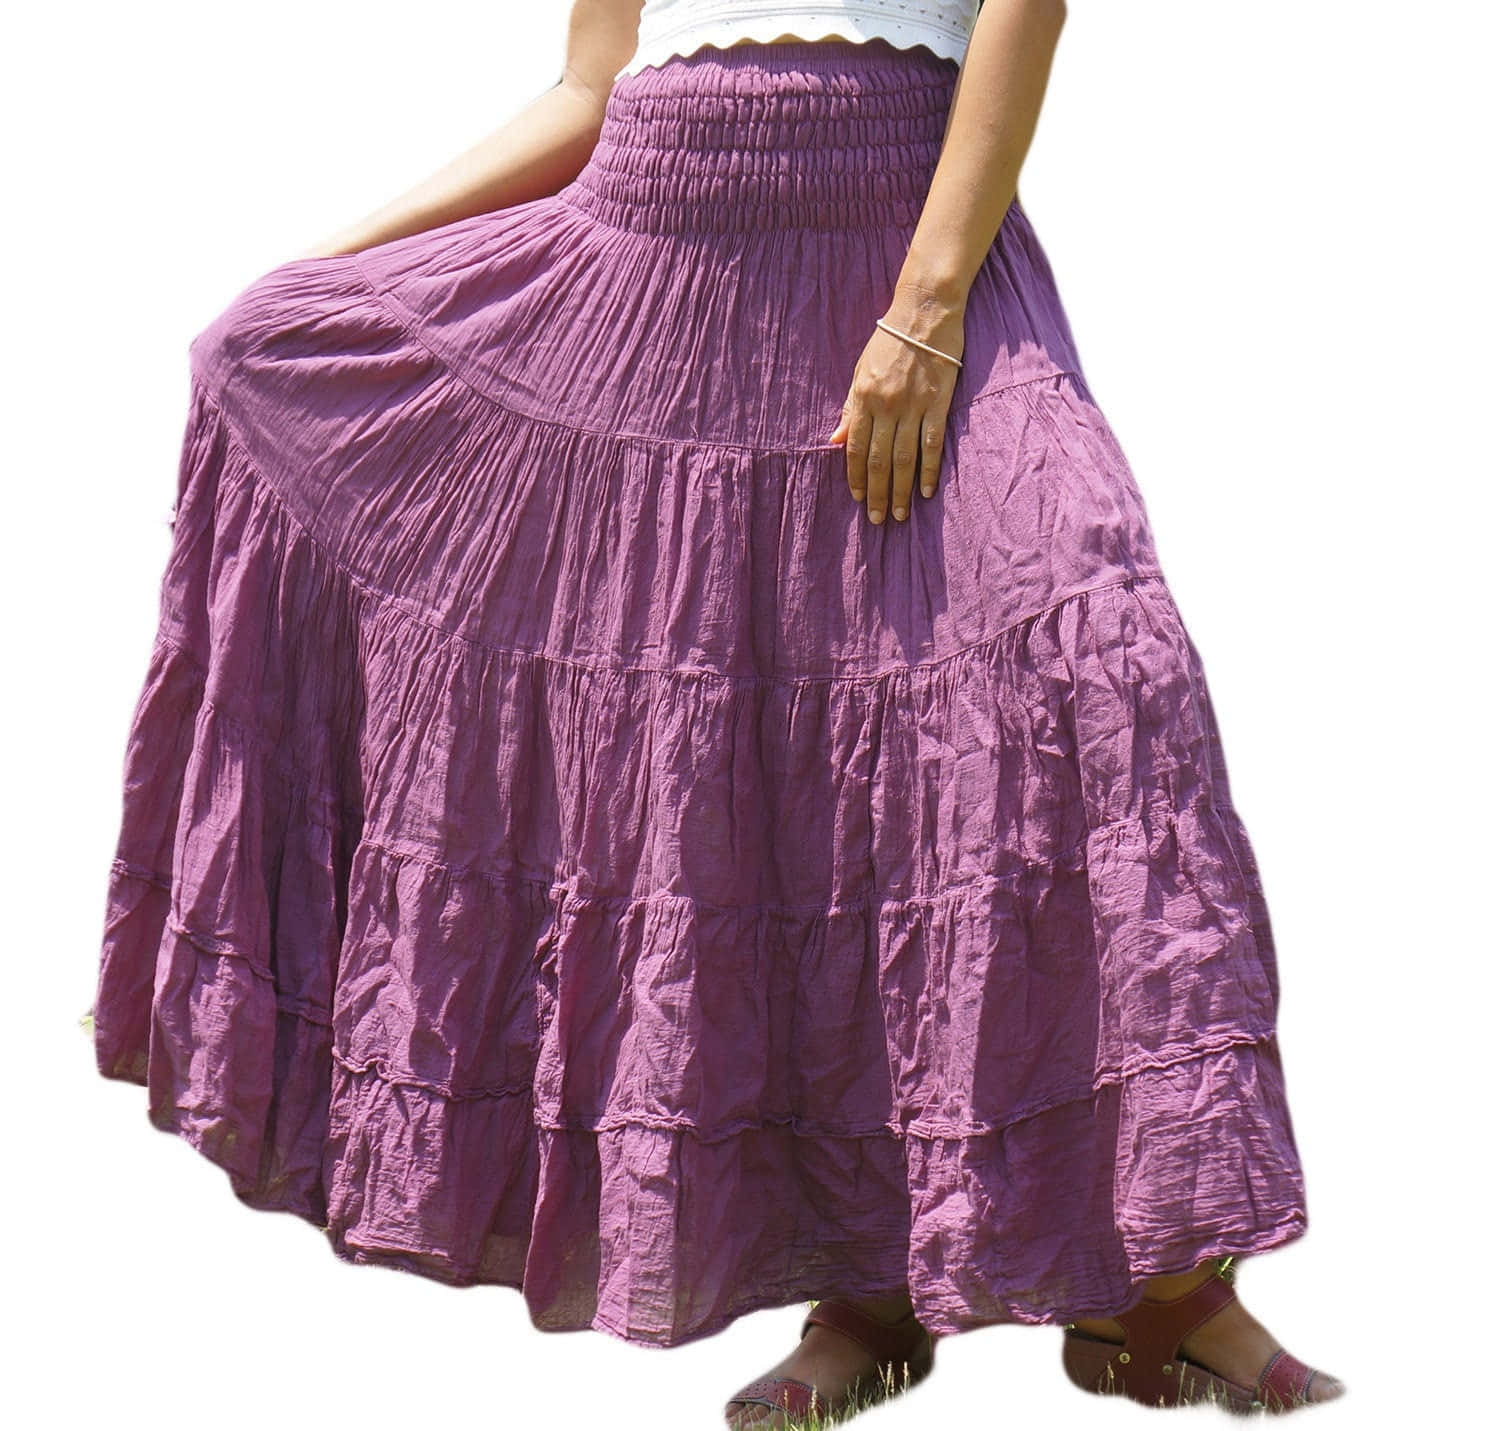 Look effortlessly stylish and feminine with this gorgeous purple skirt. Wallpaper